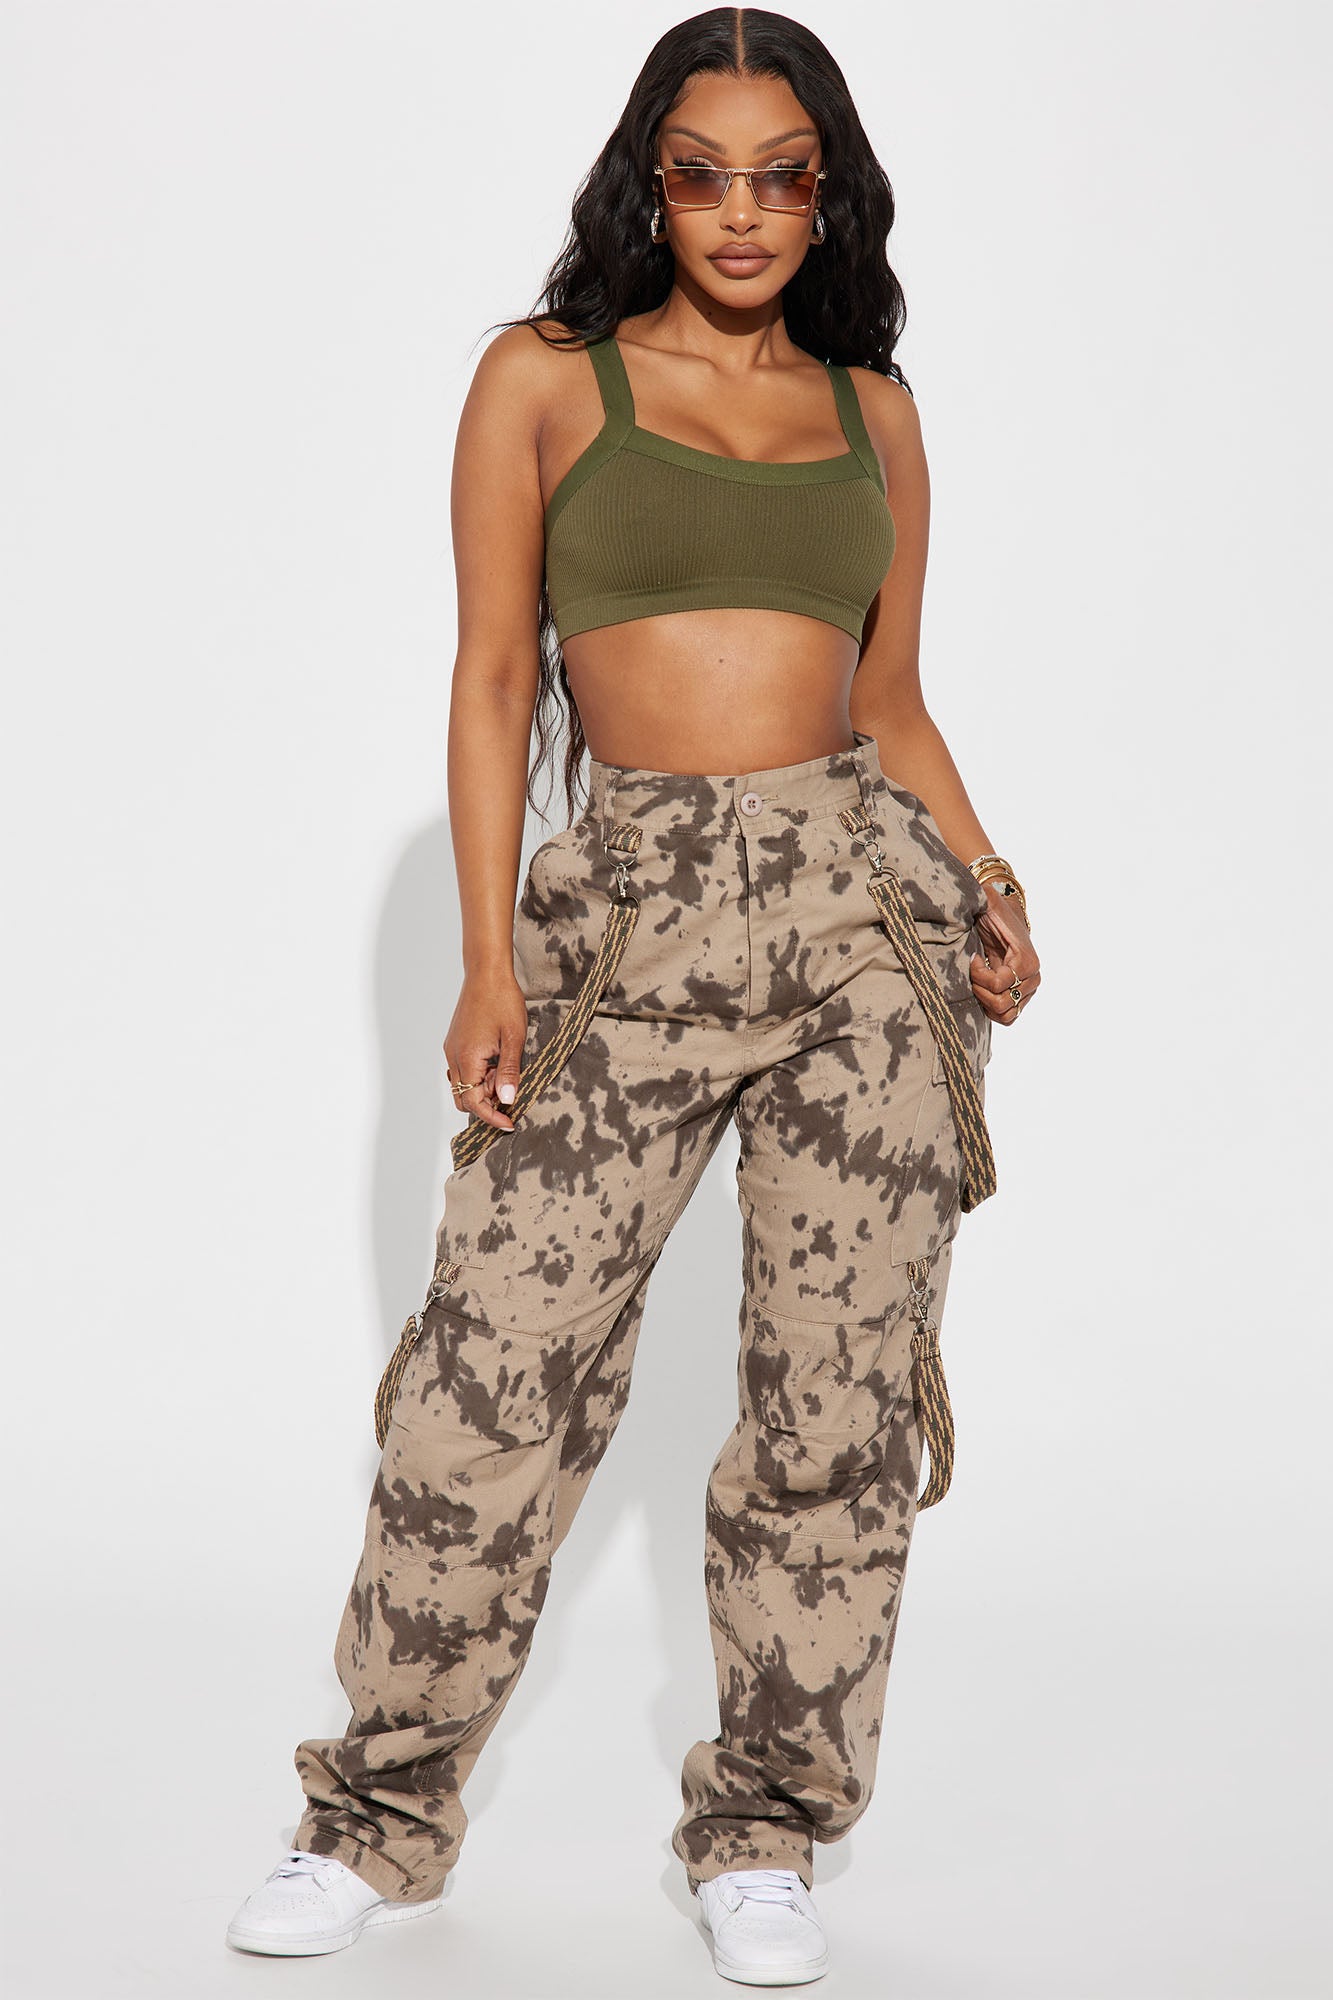 Women's Tie Dye for Cargo Pant Combo in Brown Size Small by Fashion Nova